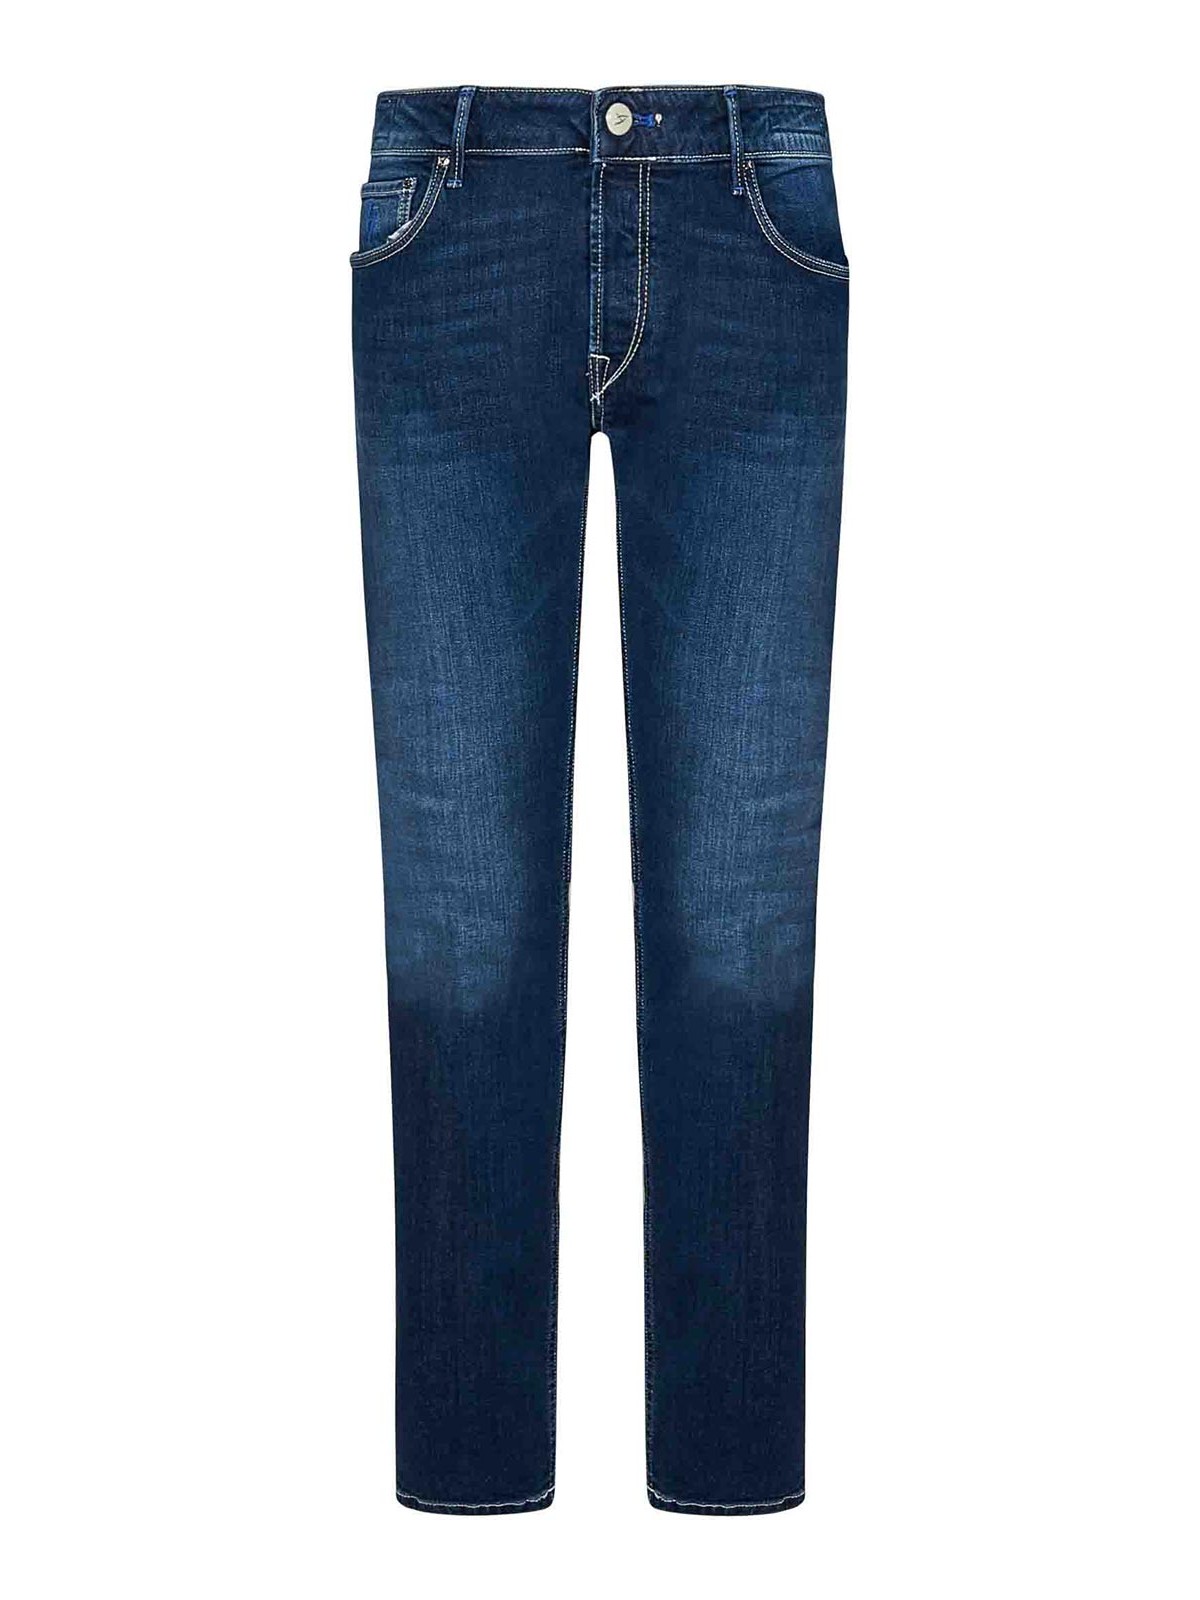 Handpicked Slim Fit Jeans In Faded Blue Cotton Denim